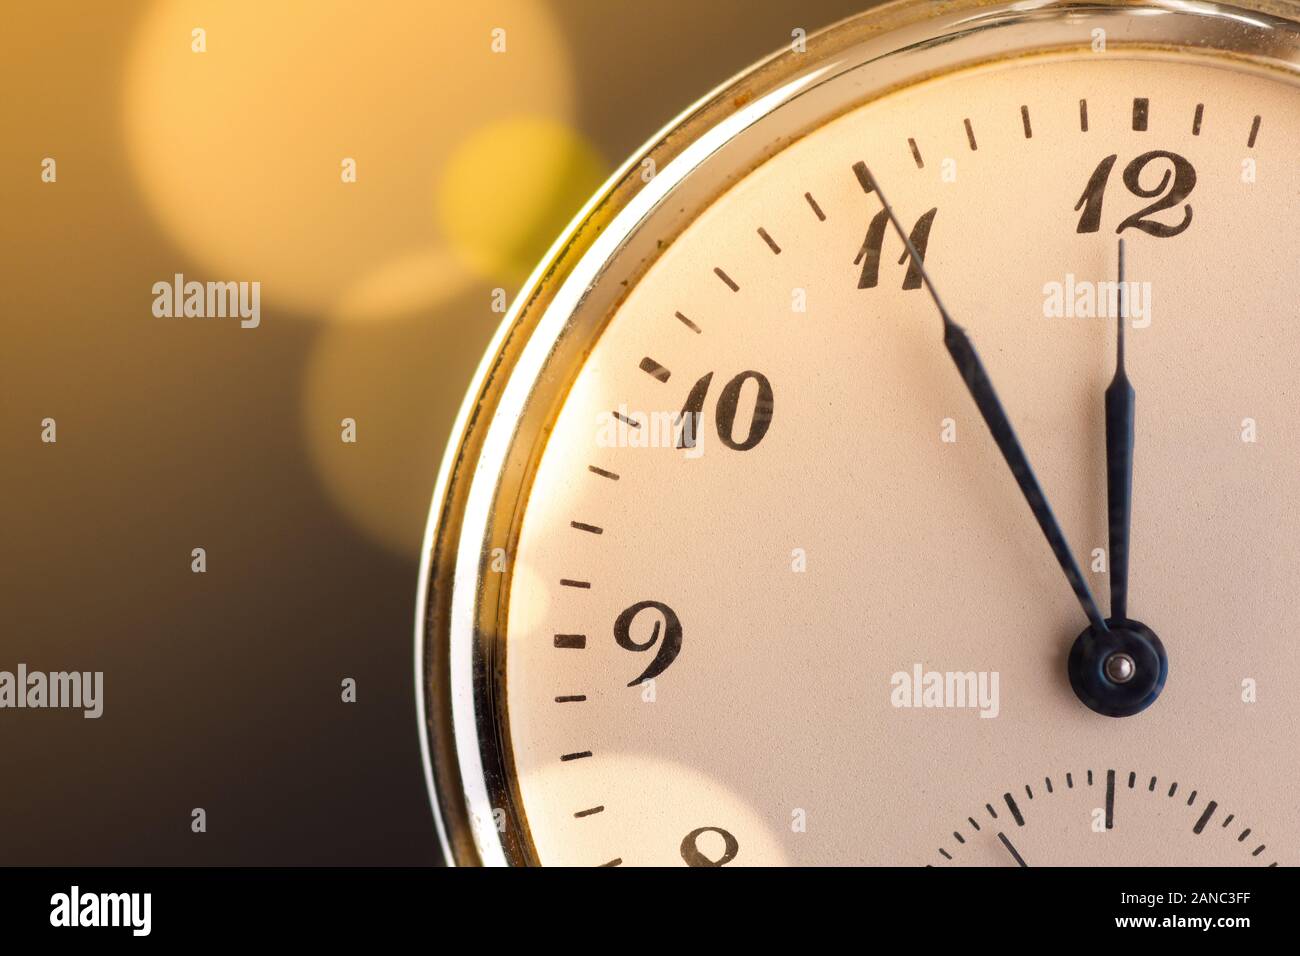 Rustic Pocket Watch. Deadline, Running Out of Time and Urgency. Time Passing Concept. Stock Photo